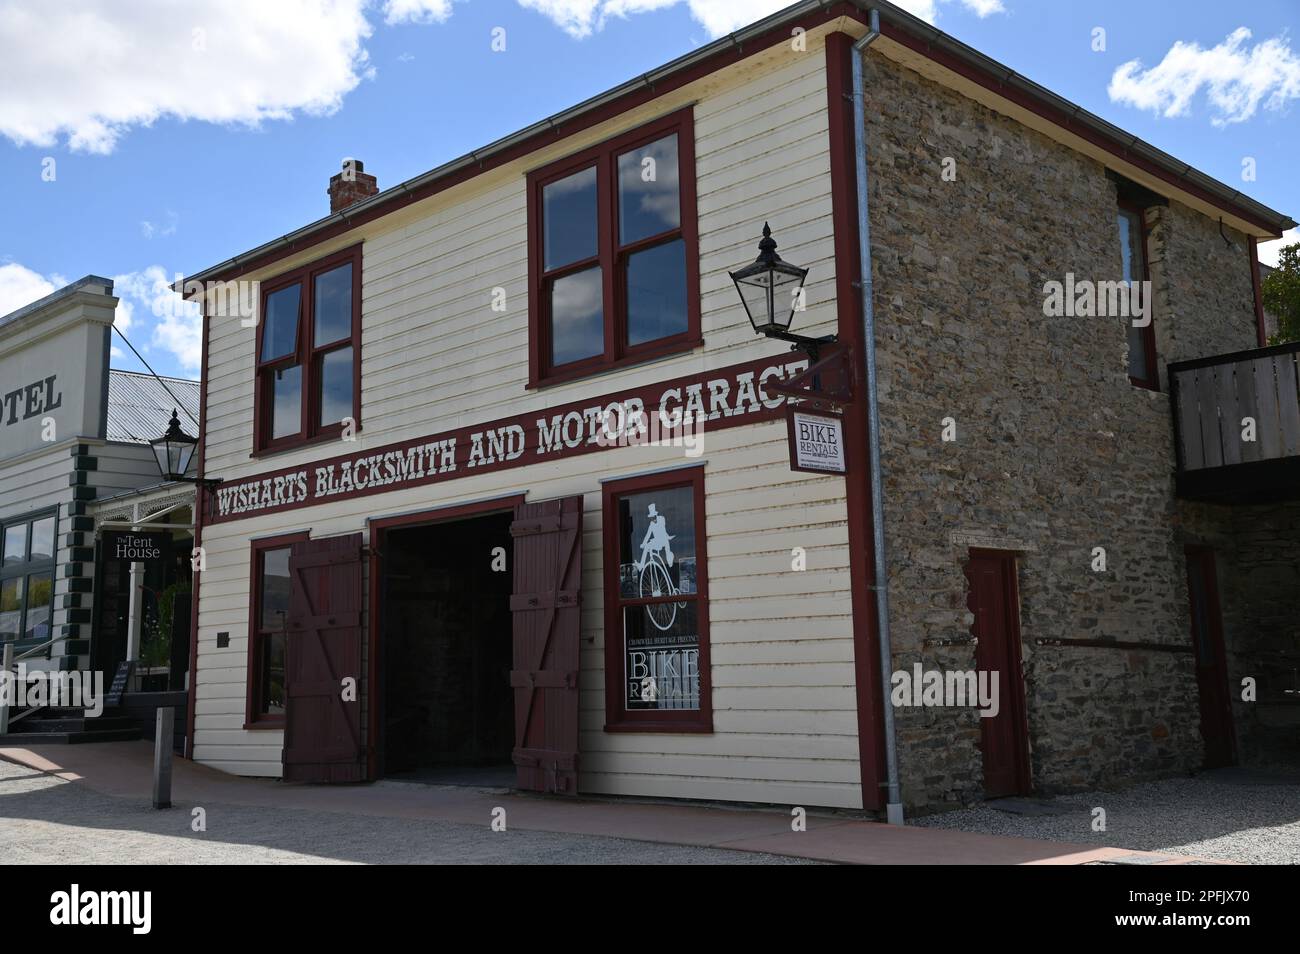 Wisharts blacksmith and motor garage one of only two buildings on its original site in Cromwell's Heritage Precinct. The building dates from 1880. Stock Photo